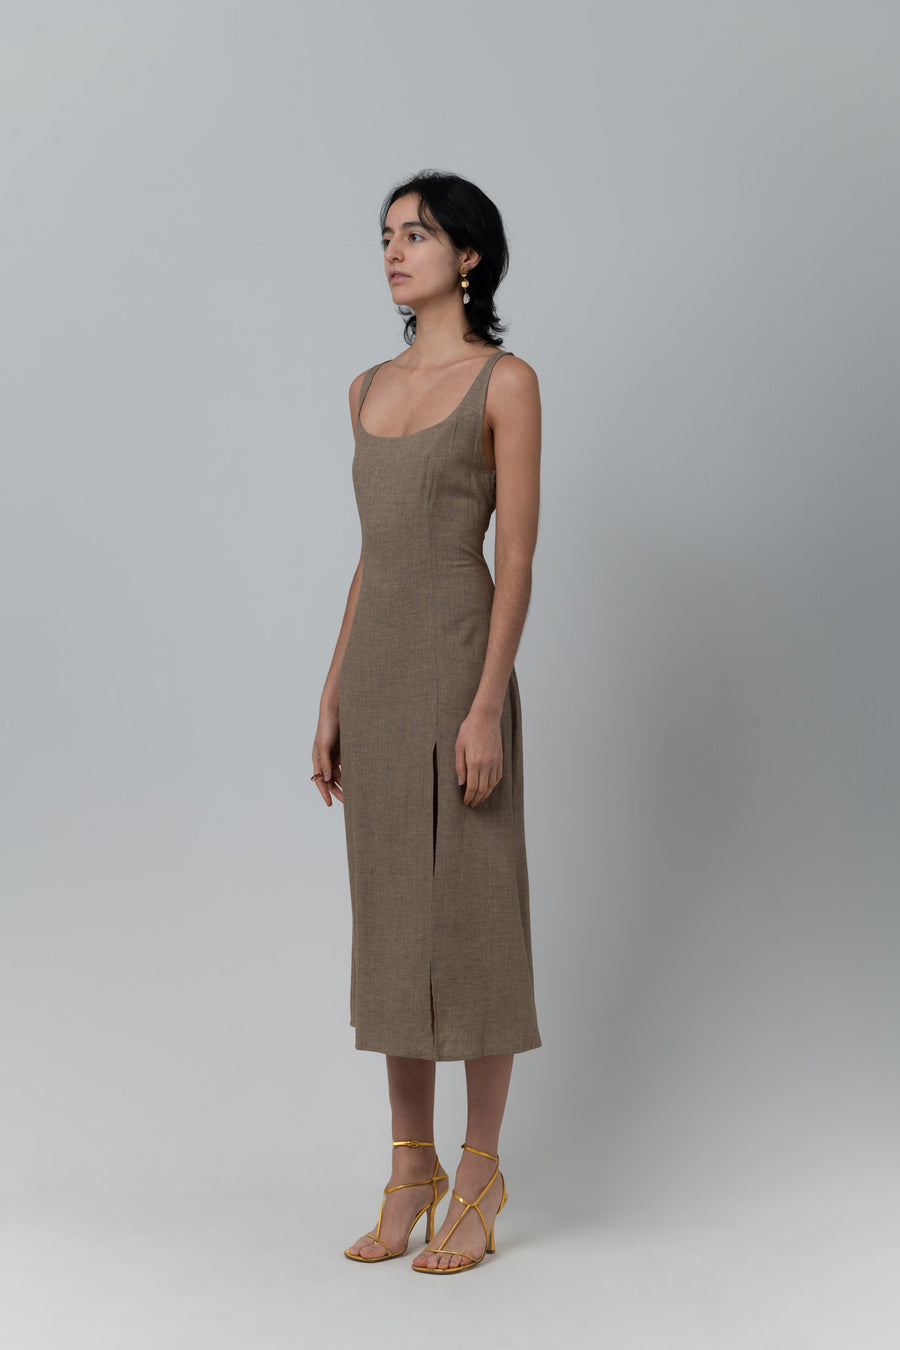 THE CITY DRESS - TAUPE